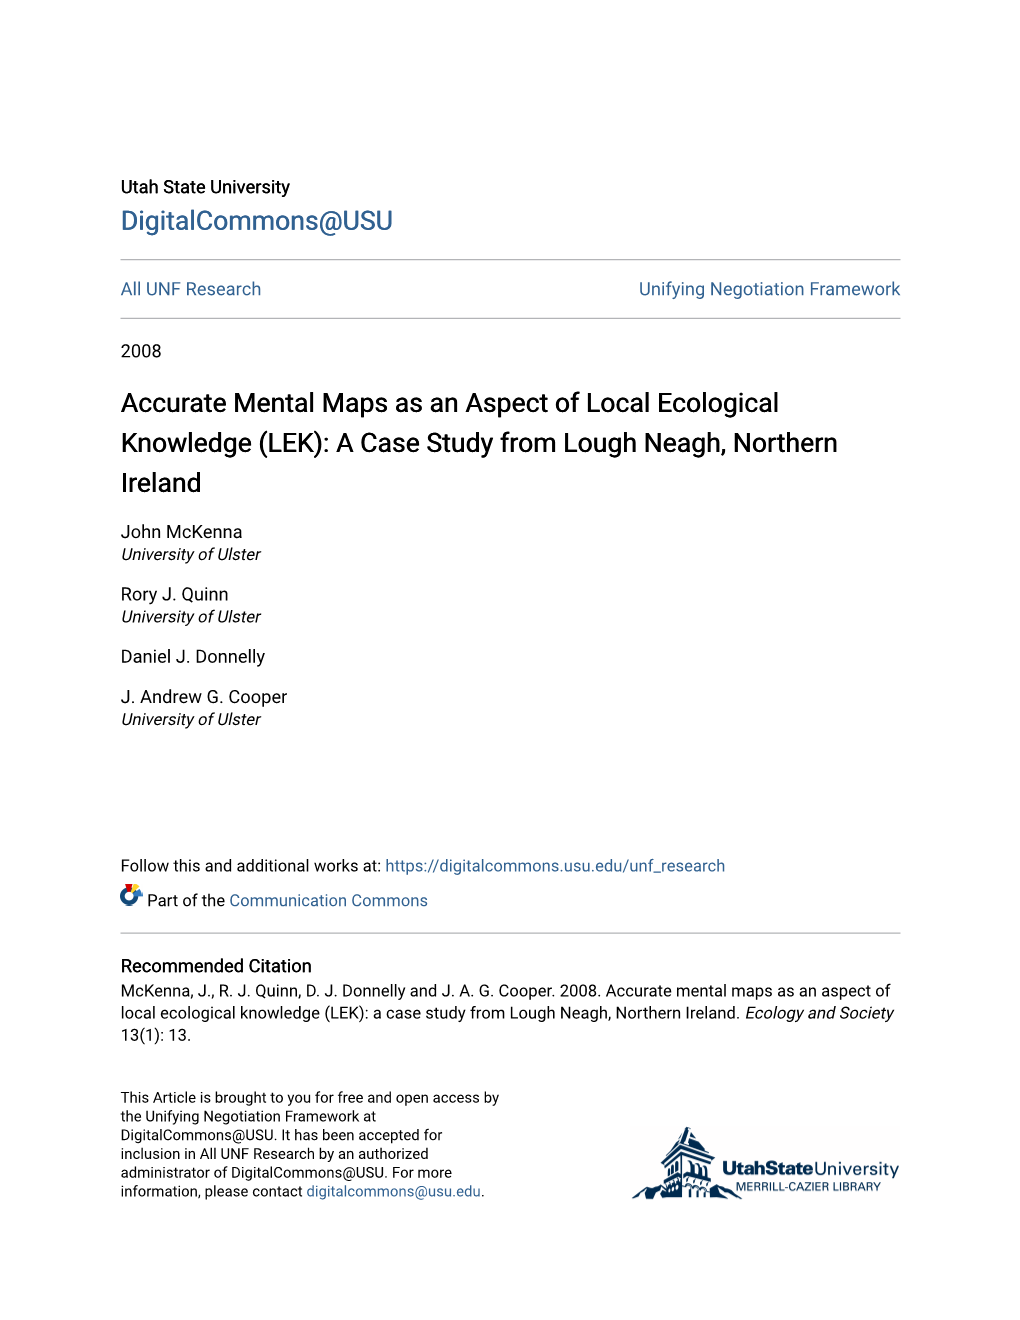 Accurate Mental Maps As an Aspect of Local Ecological Knowledge (LEK): a Case Study from Lough Neagh, Northern Ireland